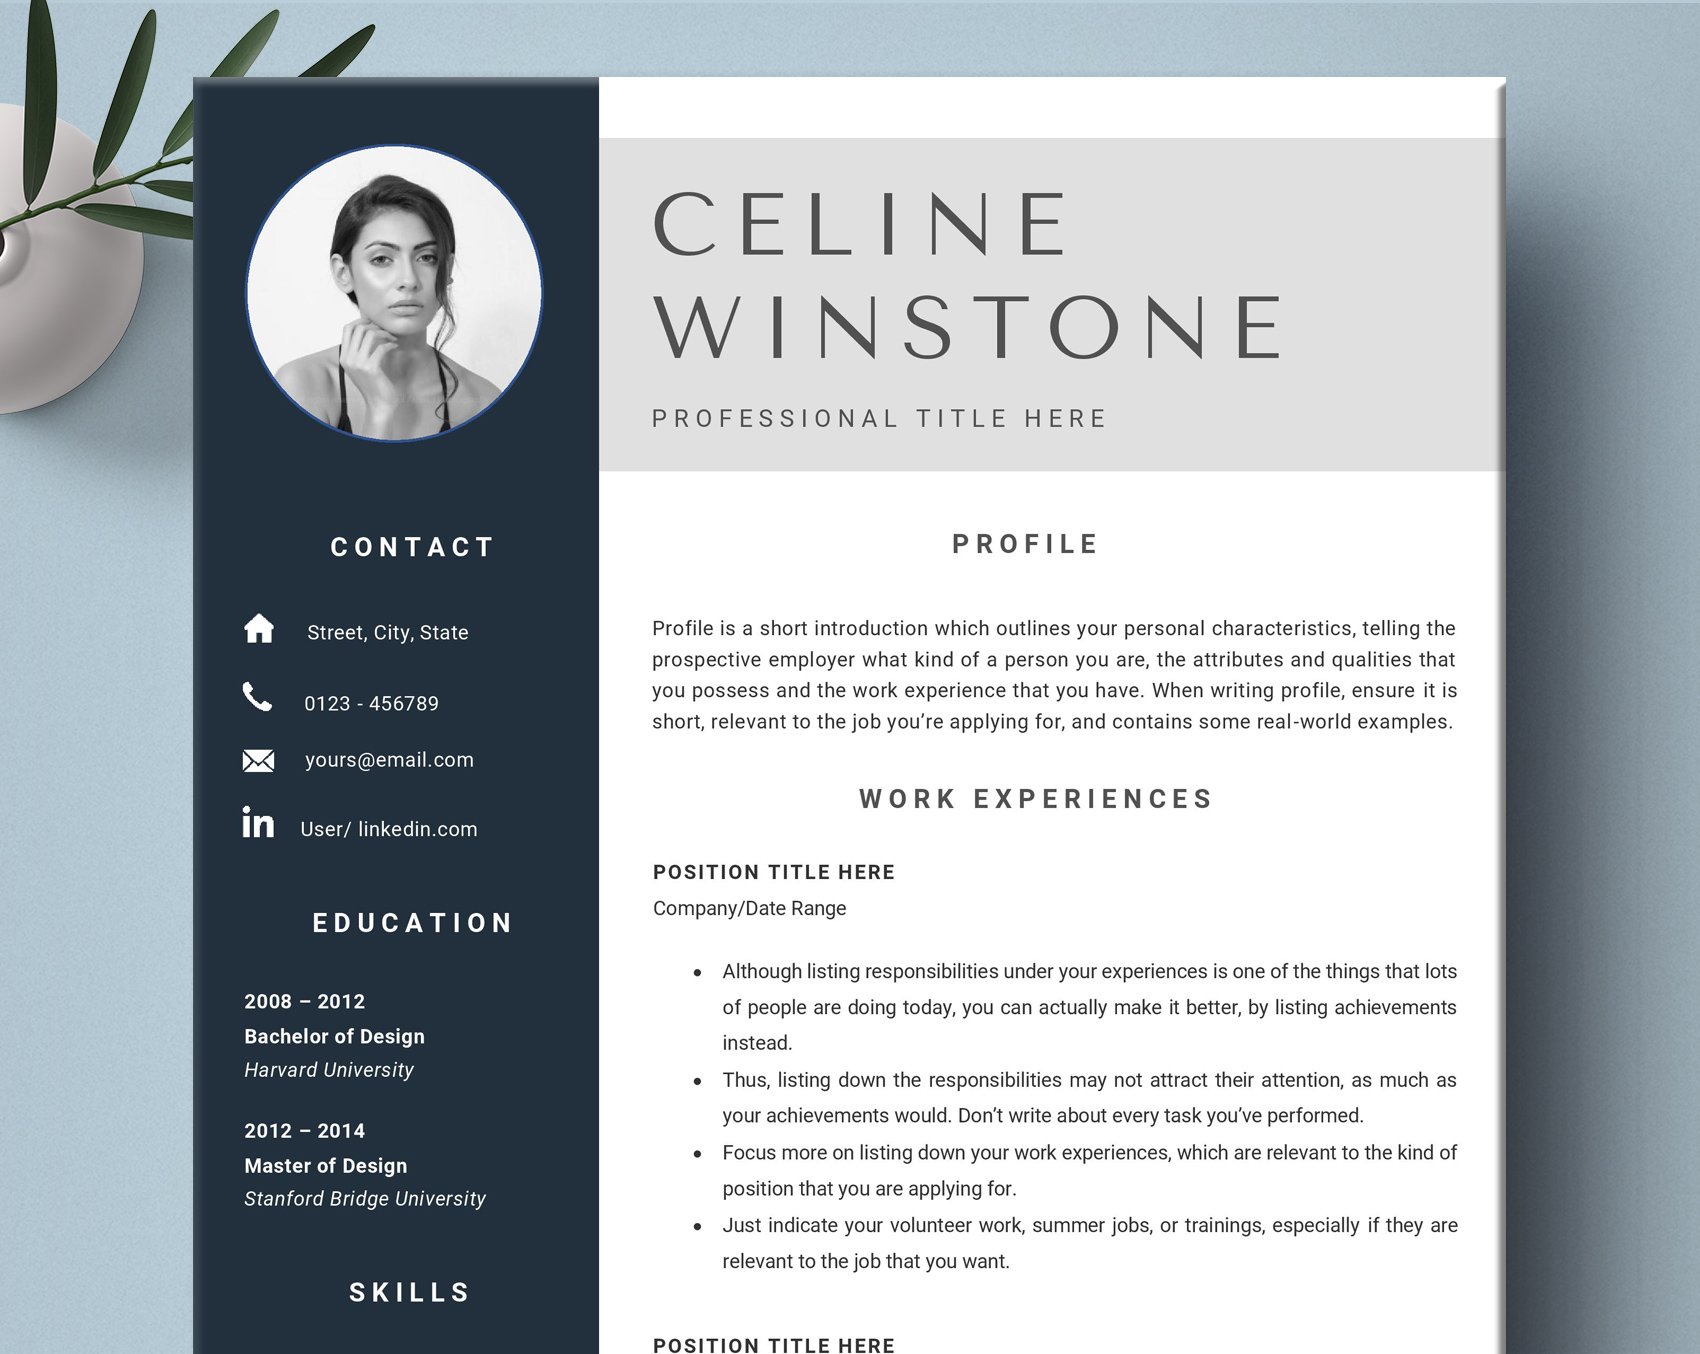 Resume Template/ CV Word cover image.